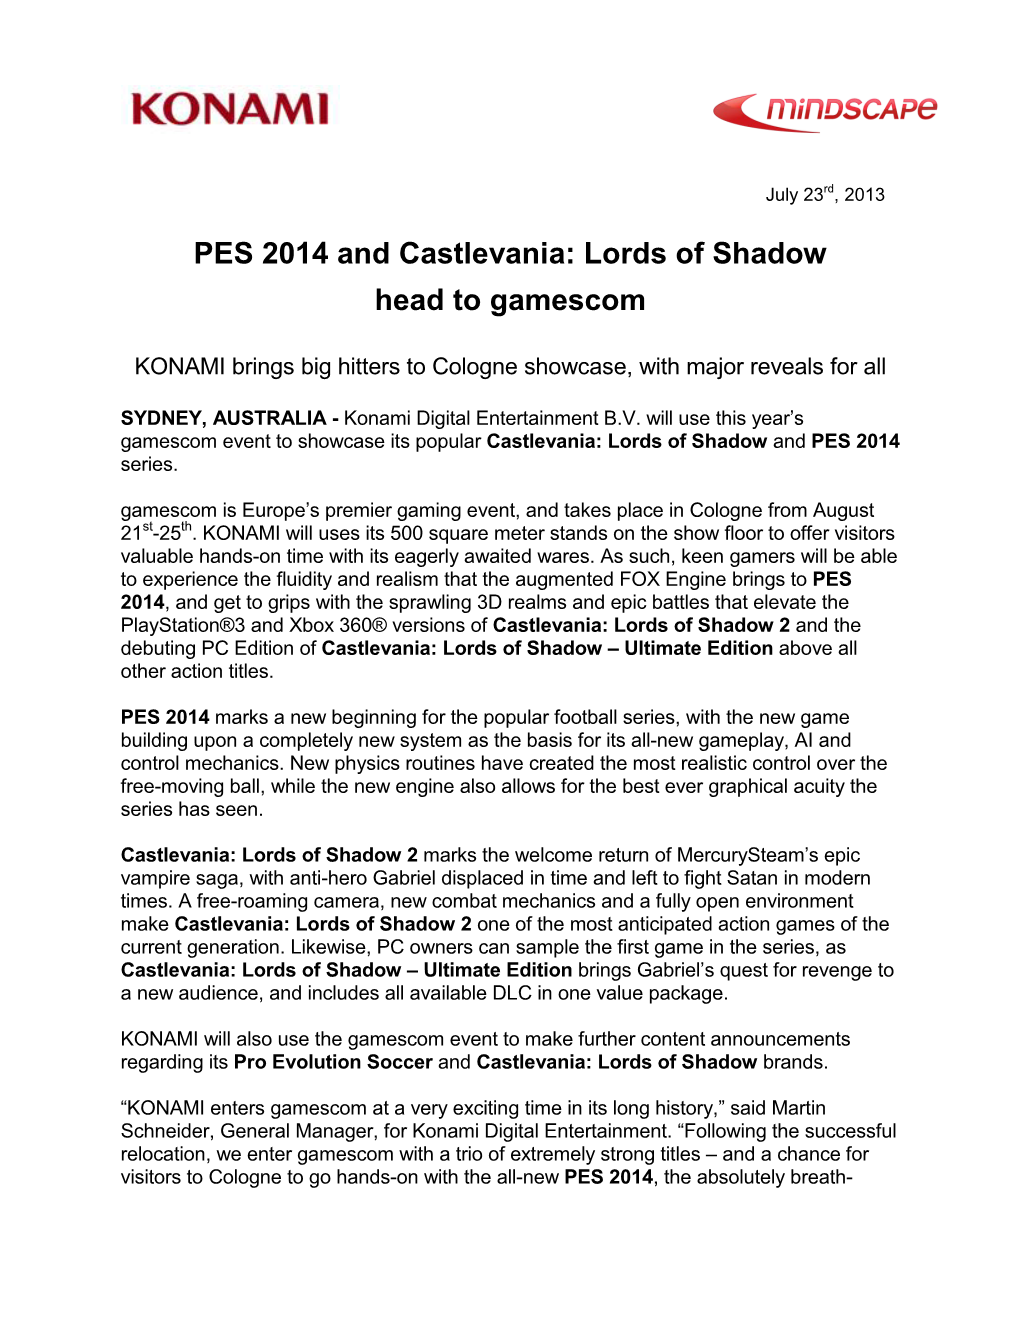 PES 2014 and Castlevania: Lords of Shadow Head to Gamescom